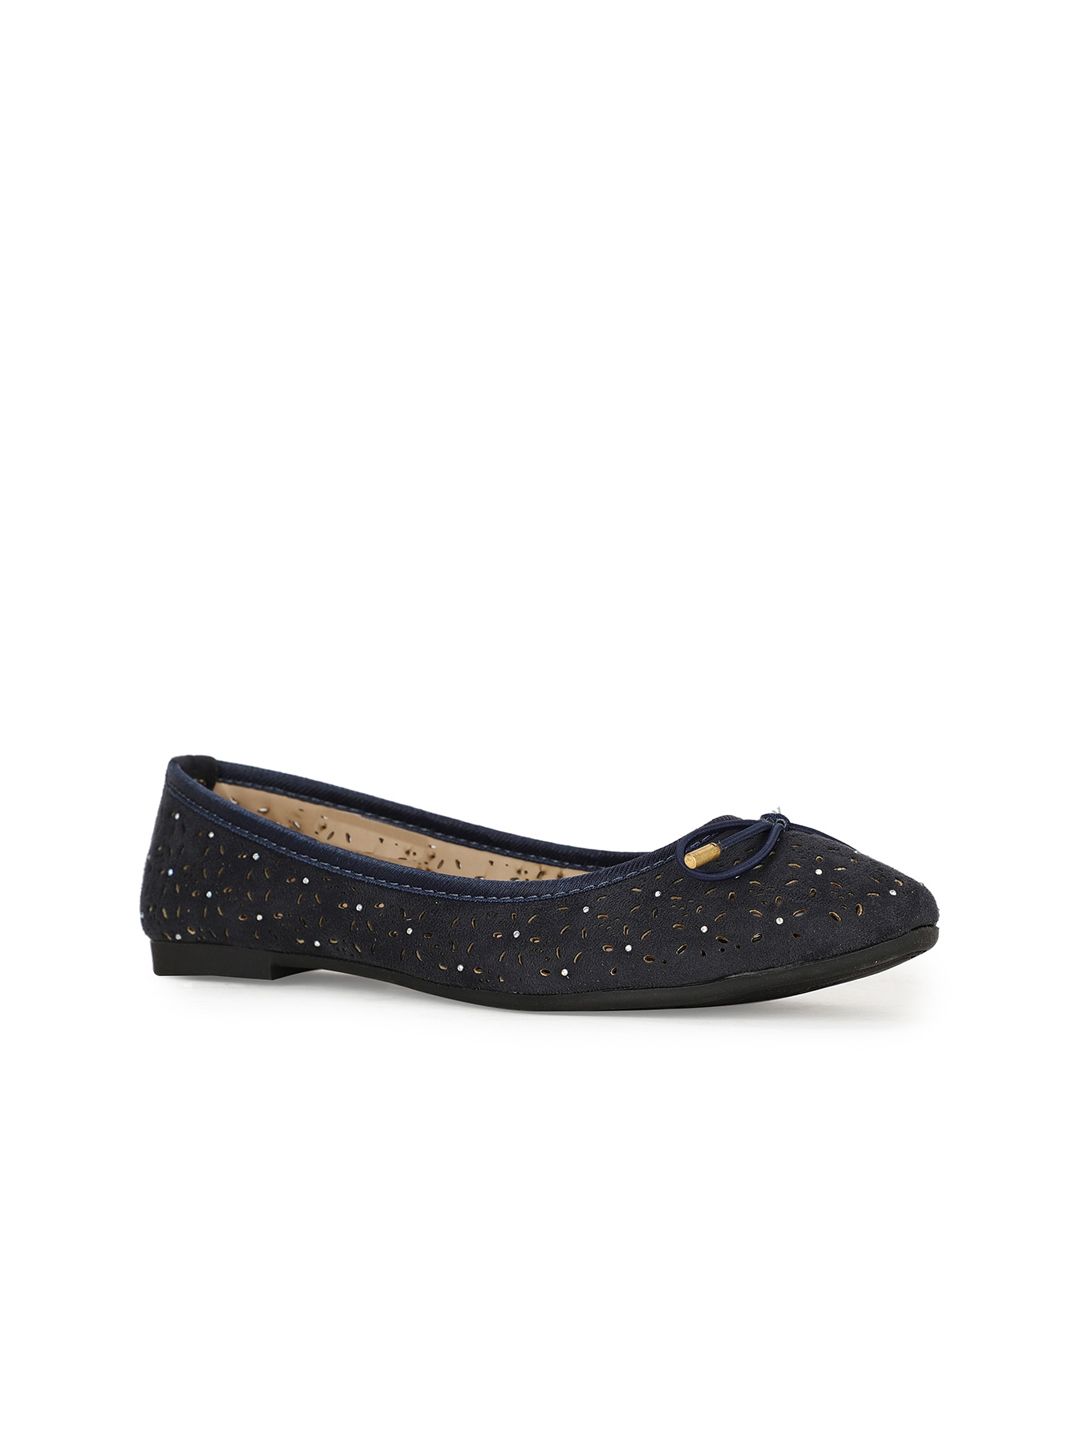 Bata Women Navy Blue Embellished Ballerinas with Laser Cuts Flats Price in India